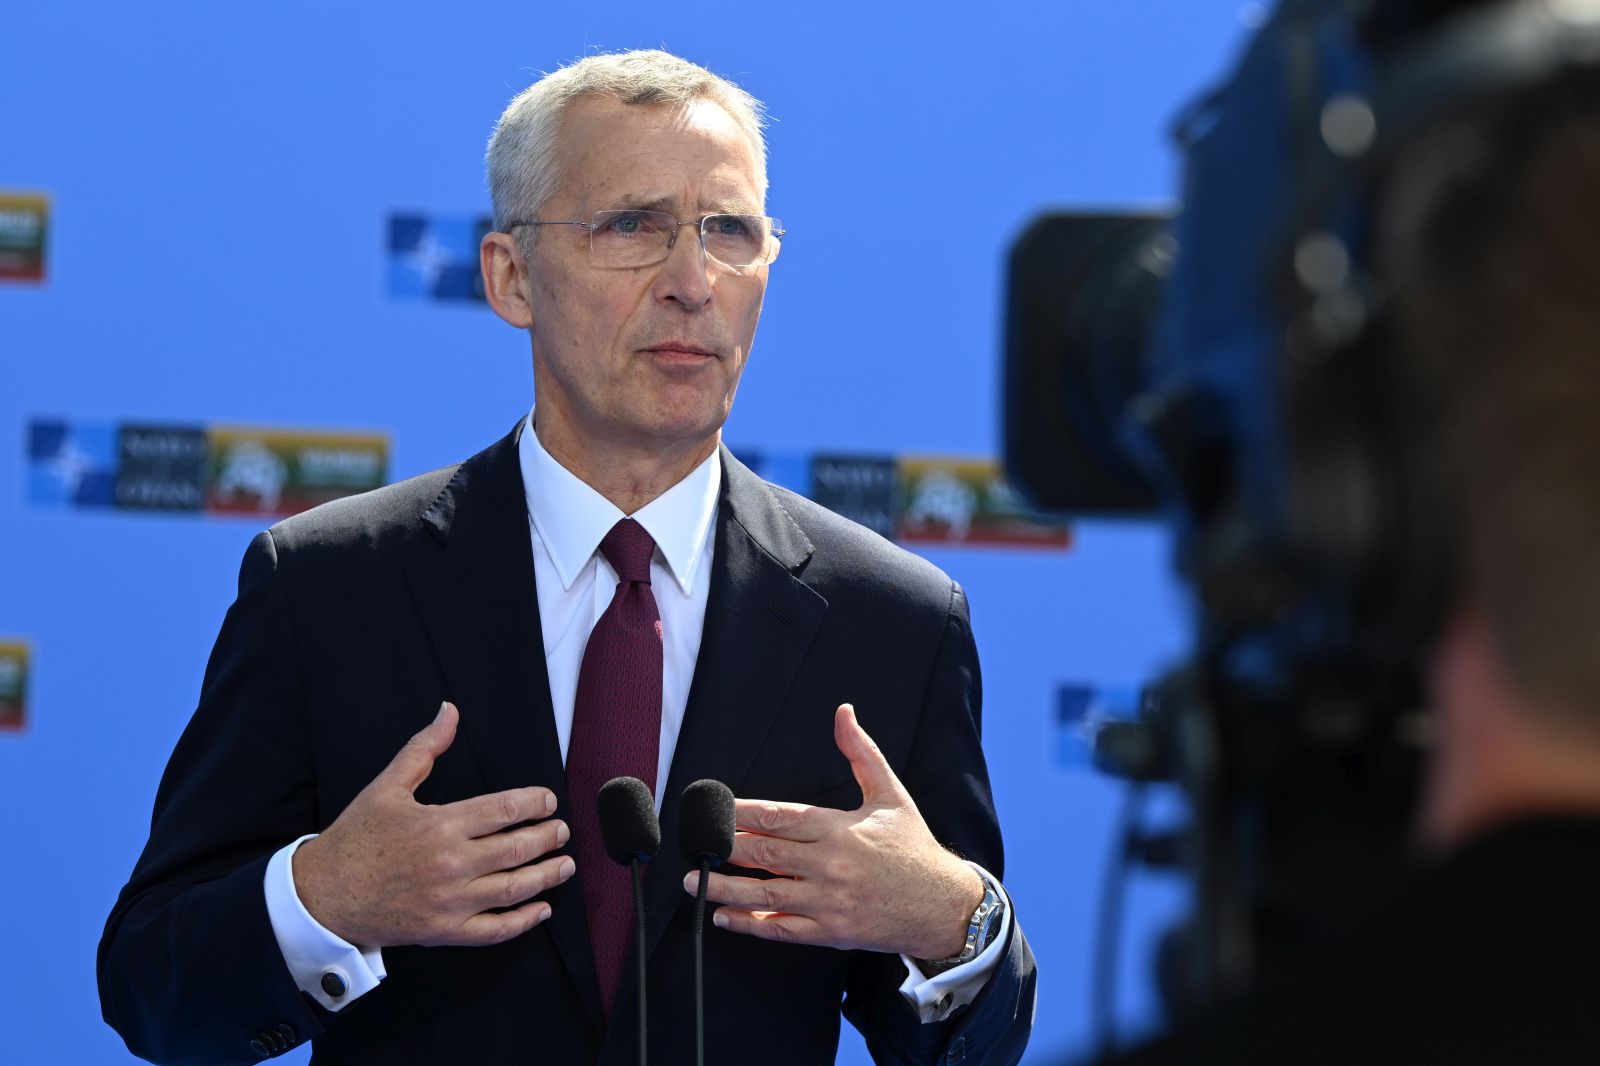 epa10738887 NATO Secretary General Jens Stoltenberg speaks to the media as he arrives at the NATO summit in Vilnius, Lithuania, 11 July 2023. The North Atlantic Treaty Organization (NATO) Summit will take place in Vilnius on 11 and 12 July 2023 with the alliance's leaders expected to adopt new defence plans.  EPA/FILIP SINGER